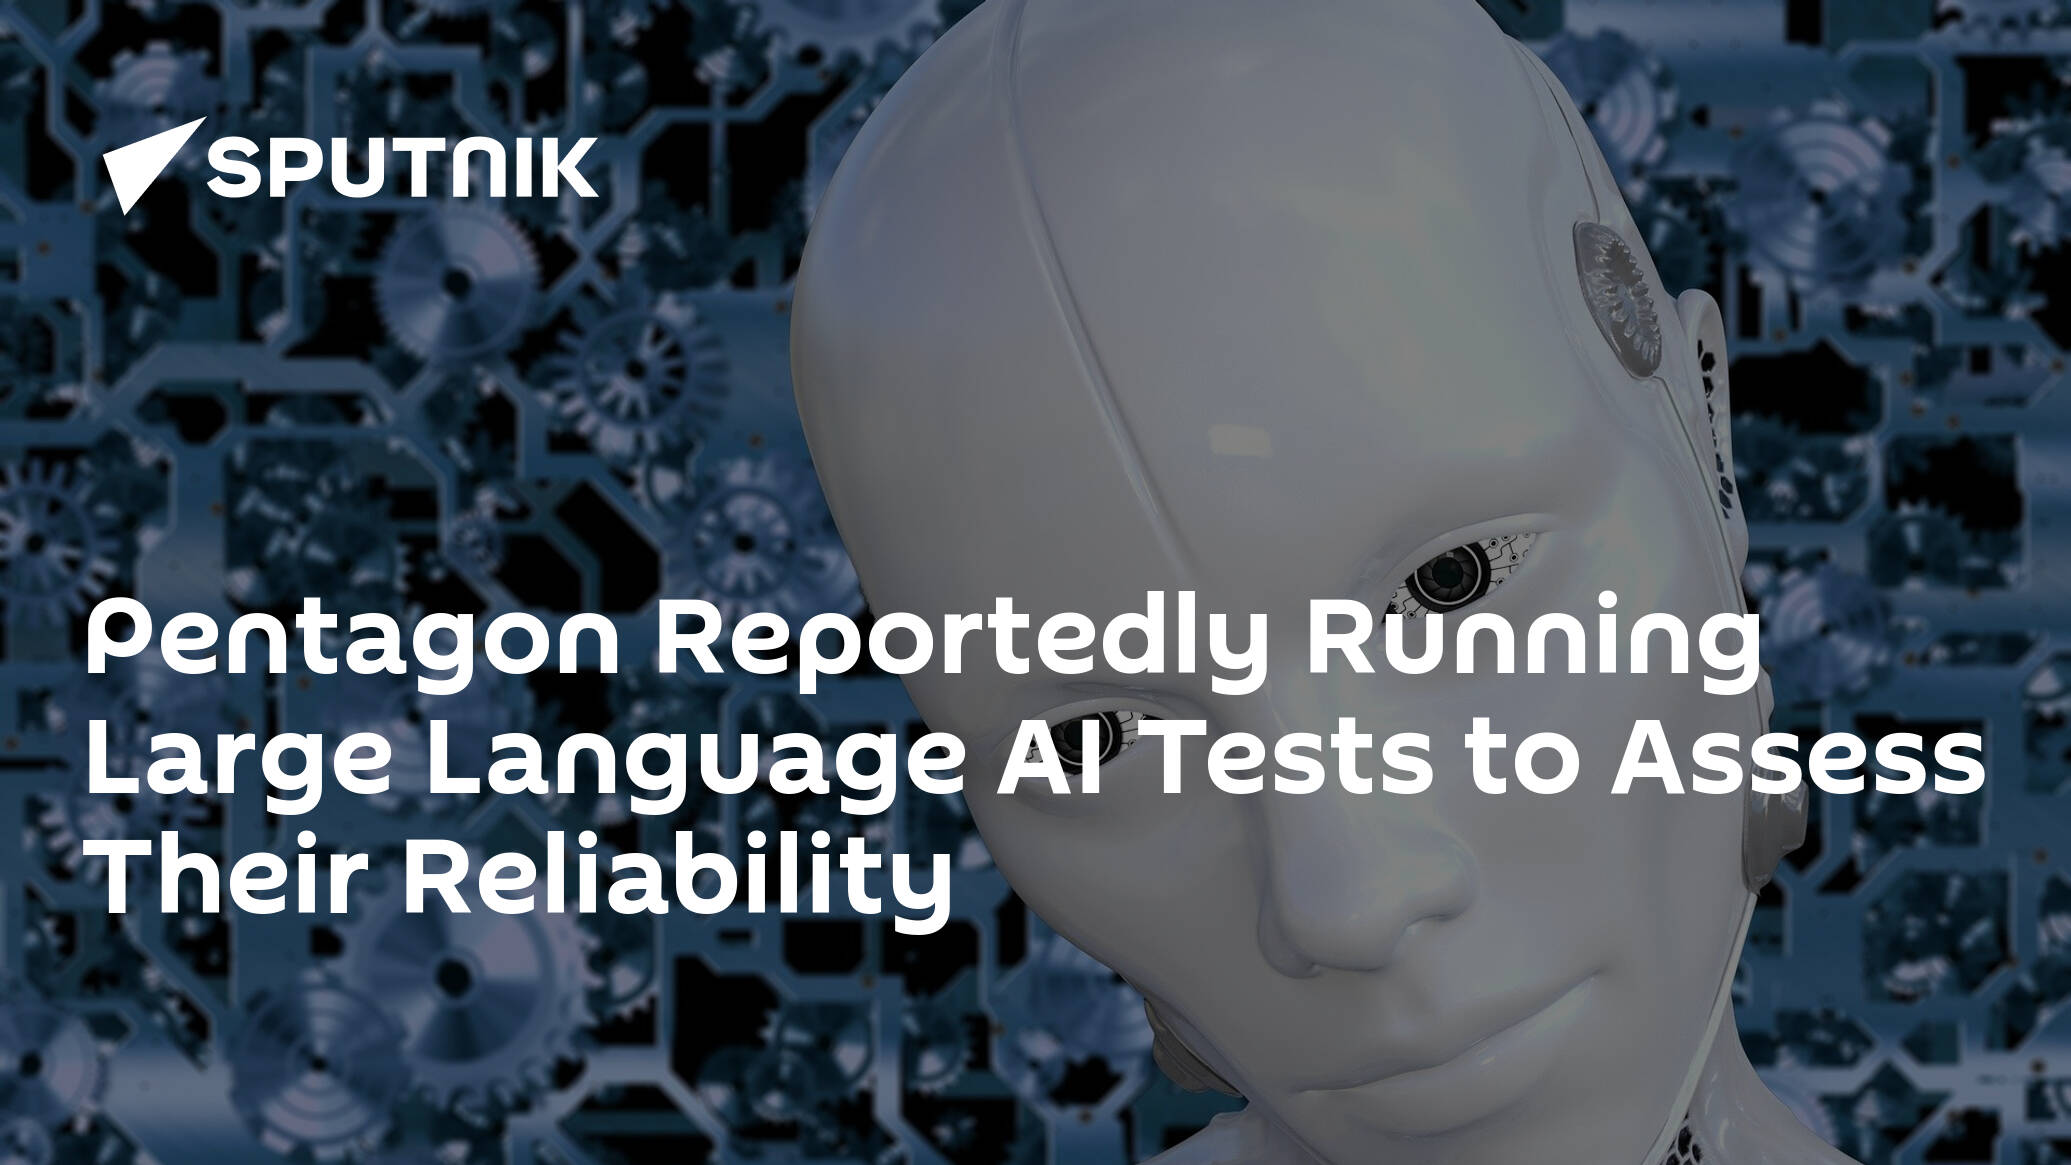 Pentagon Reportedly Running Large Language AI Tests to Assess Their Reliability